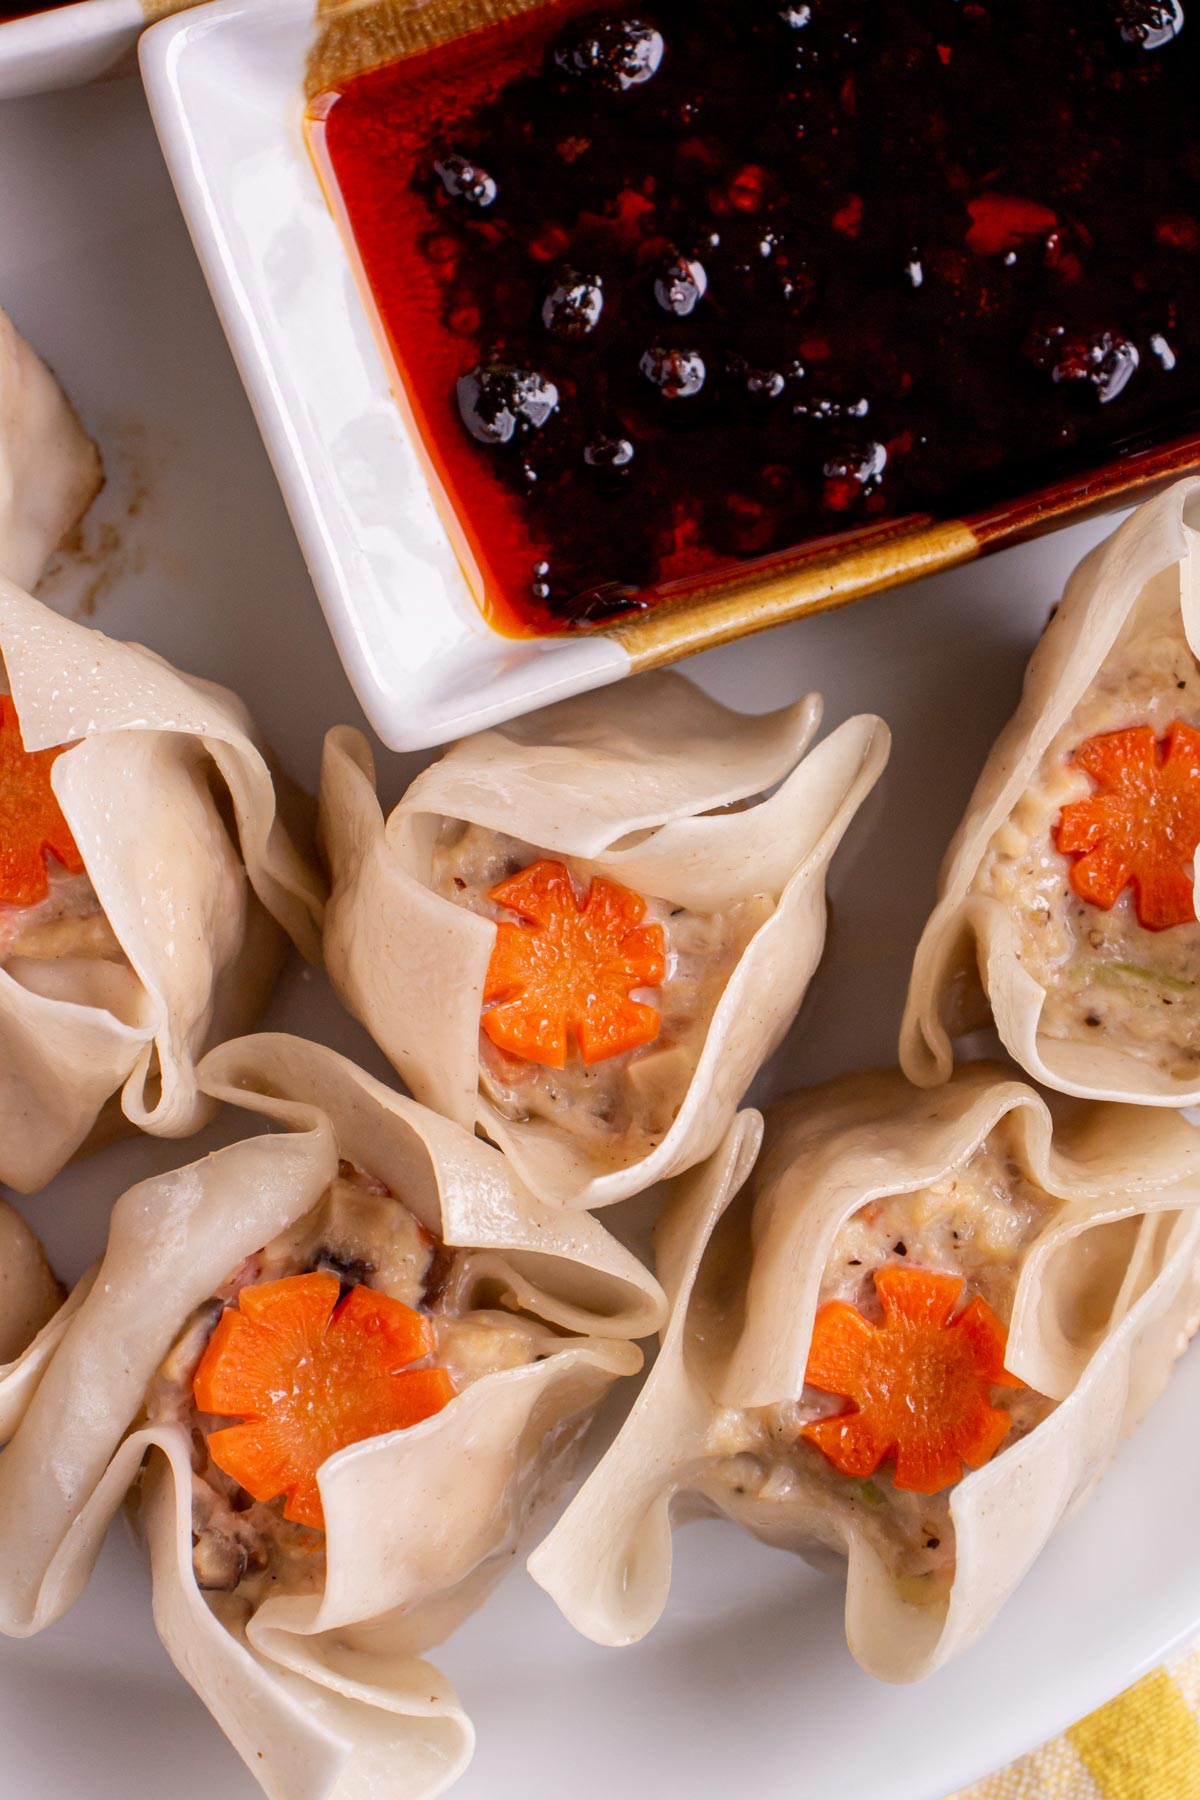 Closeup of chicken siu mai dumplings with decorative carrot garnish and a side of chili oil.